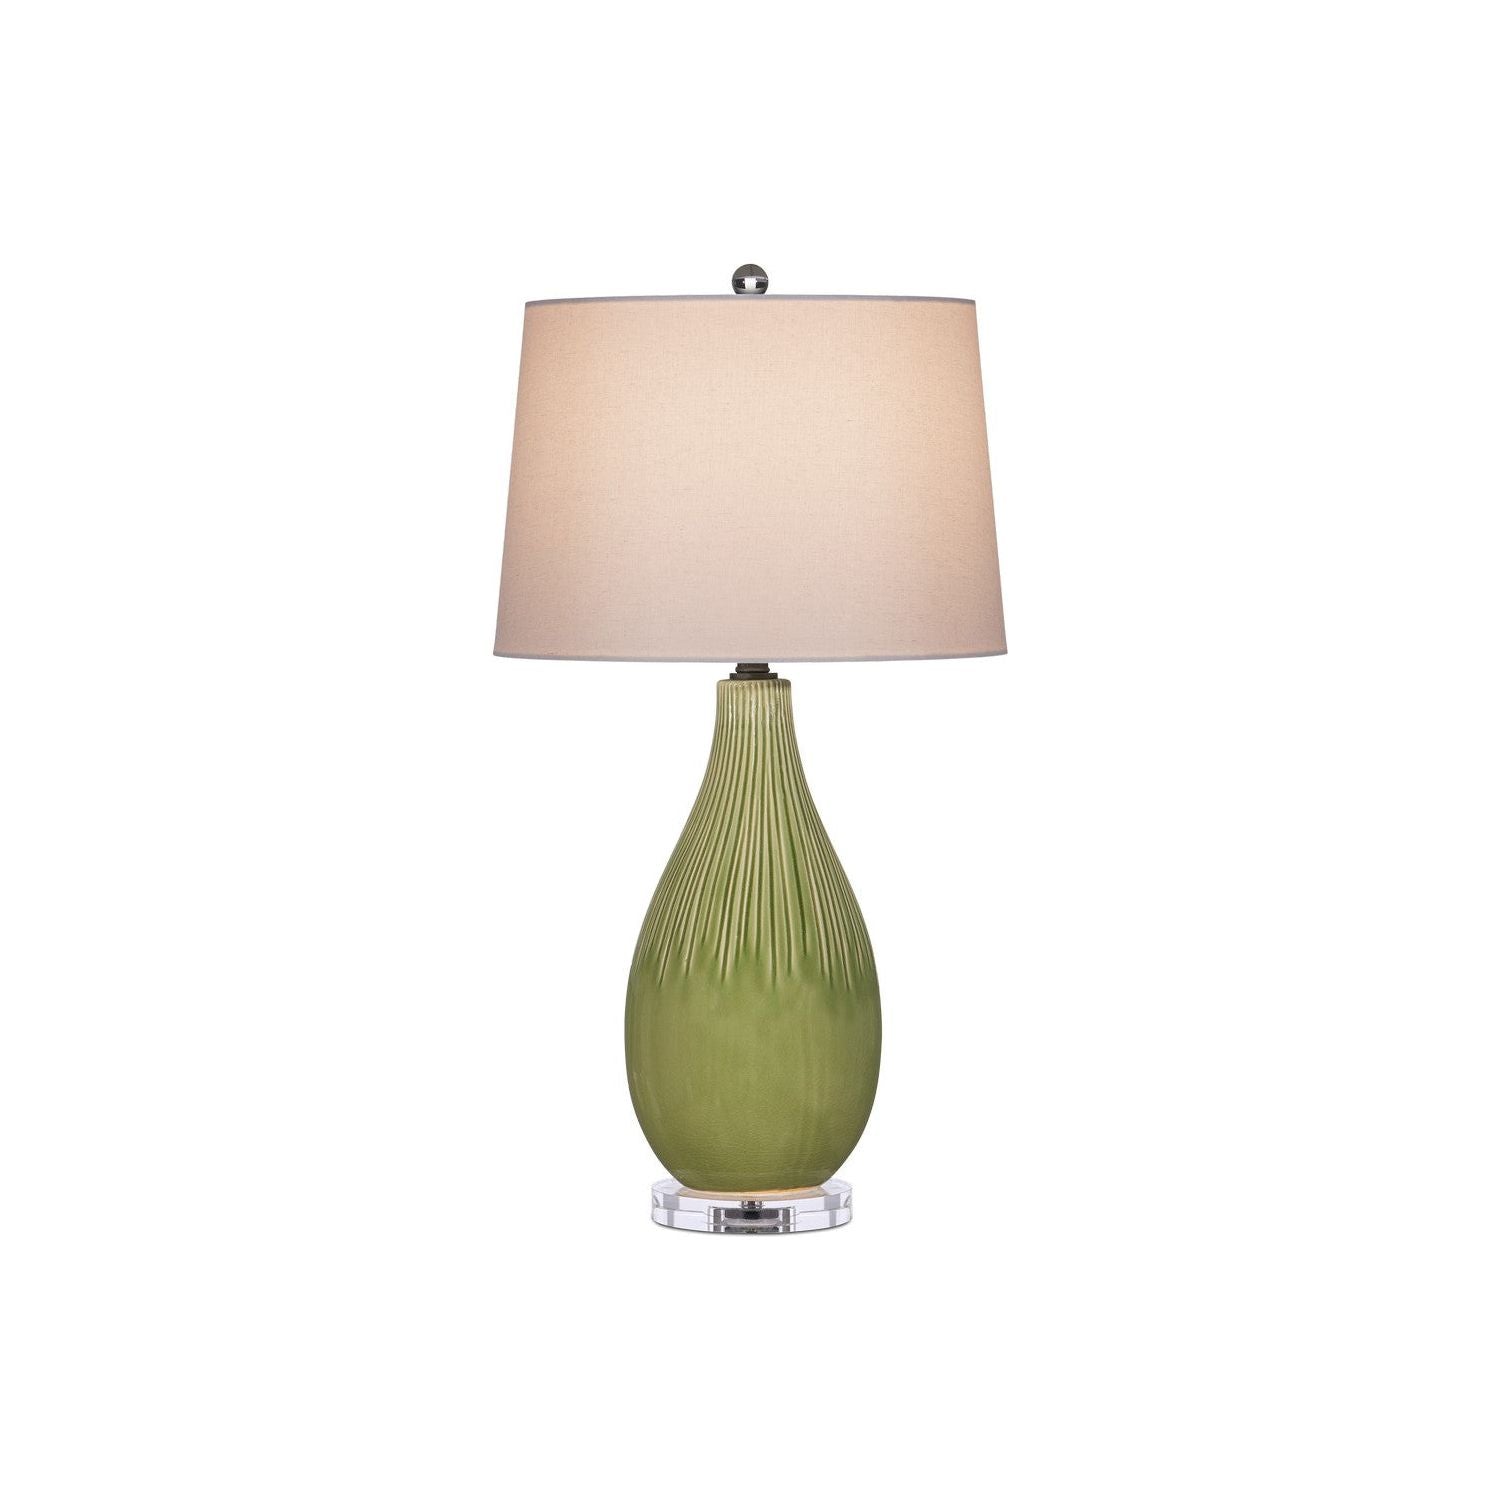 Currey and Company - 6000-0943 - One Light Table Lamp - Pale Green/Off-White/Clear/Satin Nickel